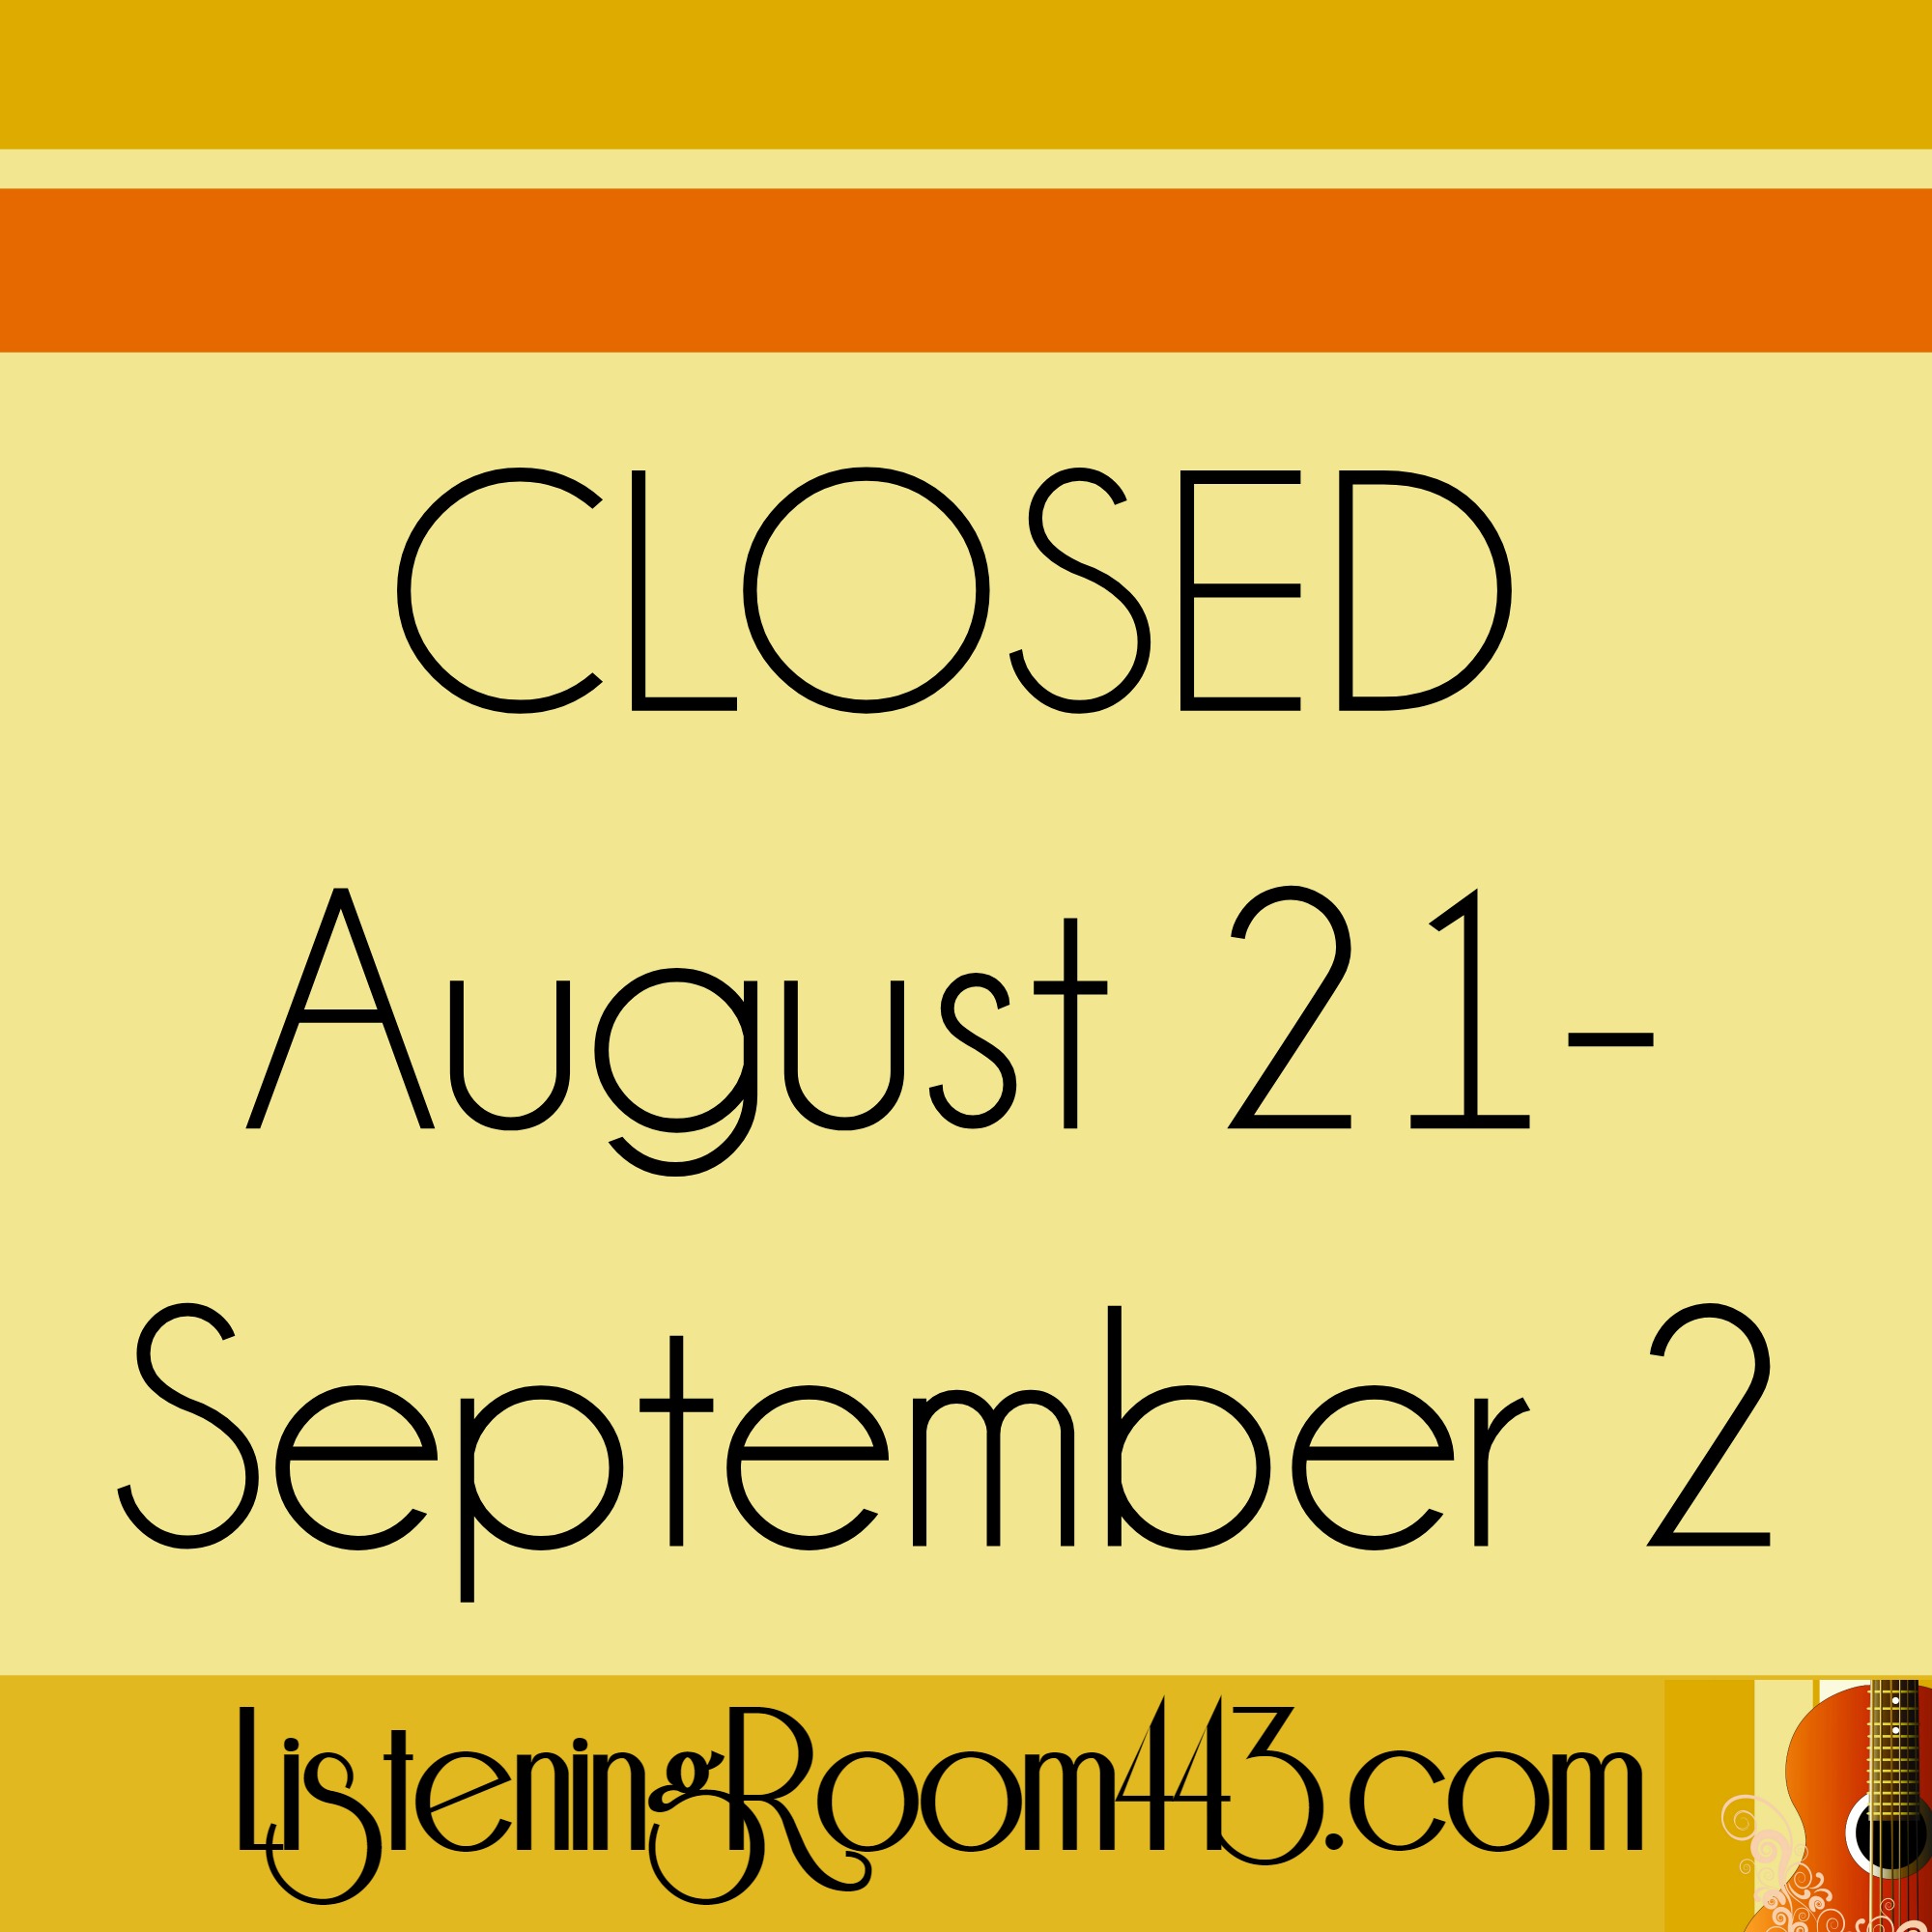 Closed August 21 - Sept 2